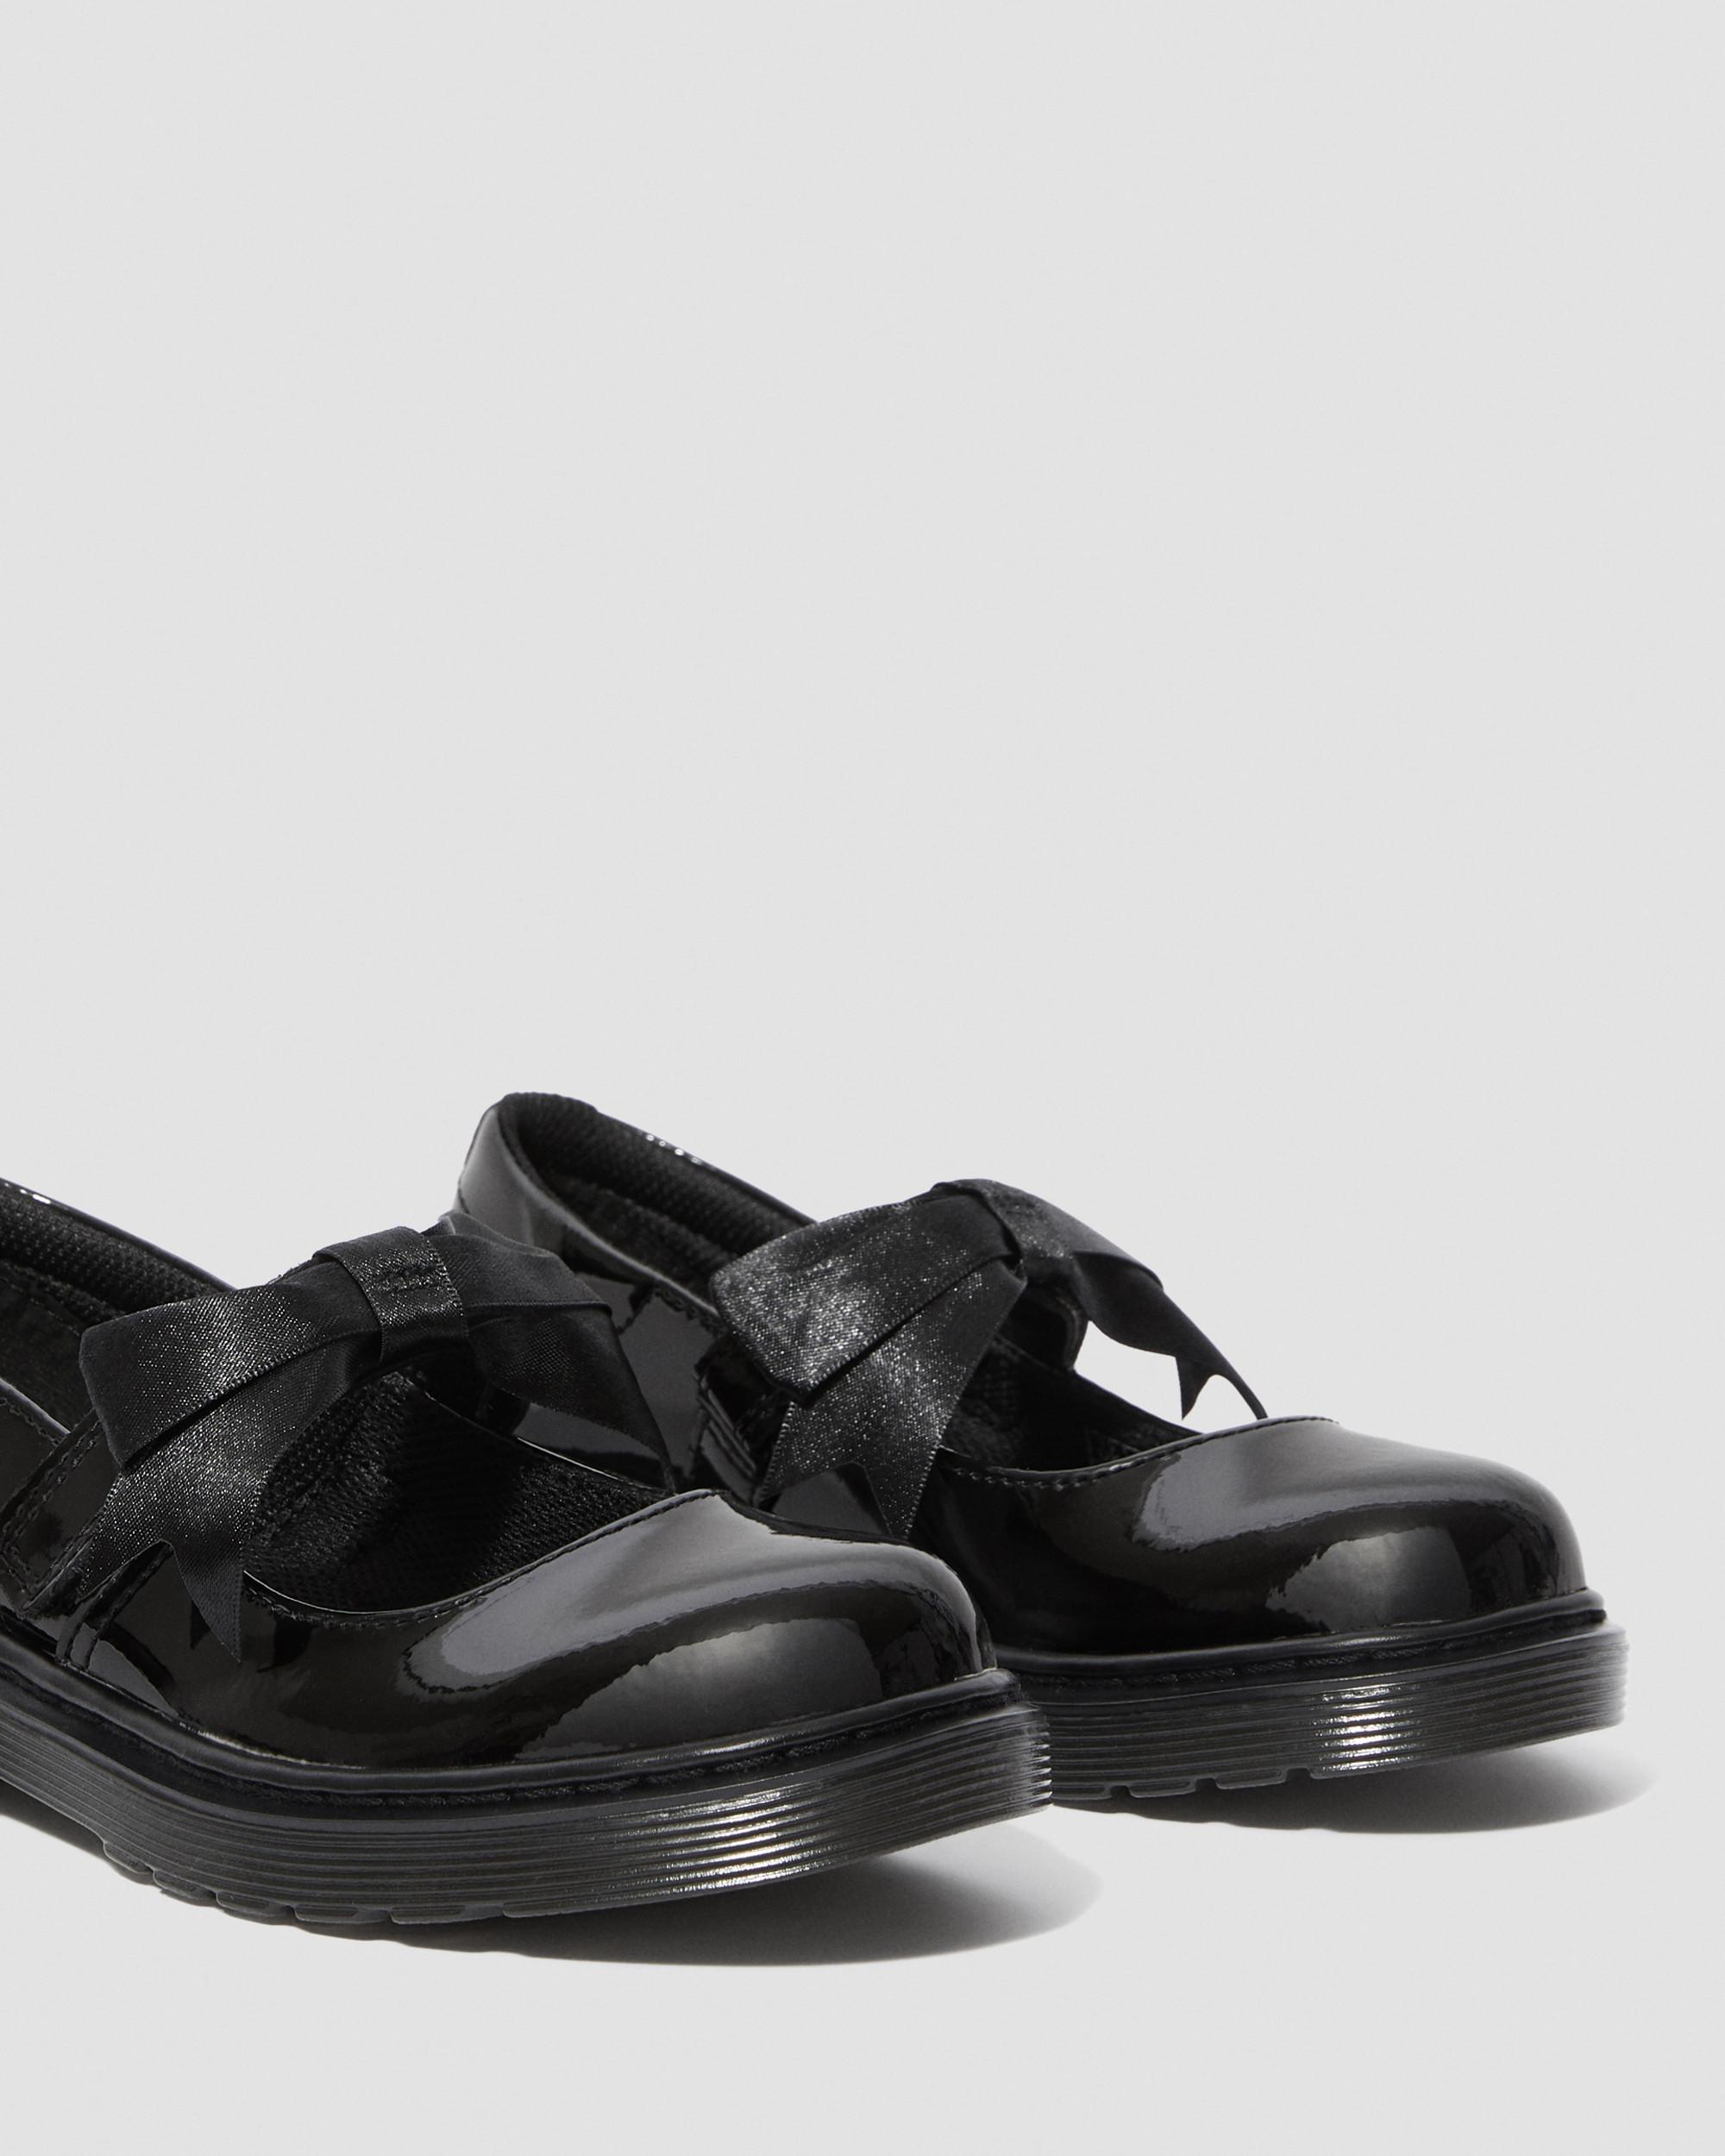 Junior Maccy II Patent Leather Mary Jane ShoesJunior Maccy II Patent Leather Mary Jane Shoes Dr. Martens